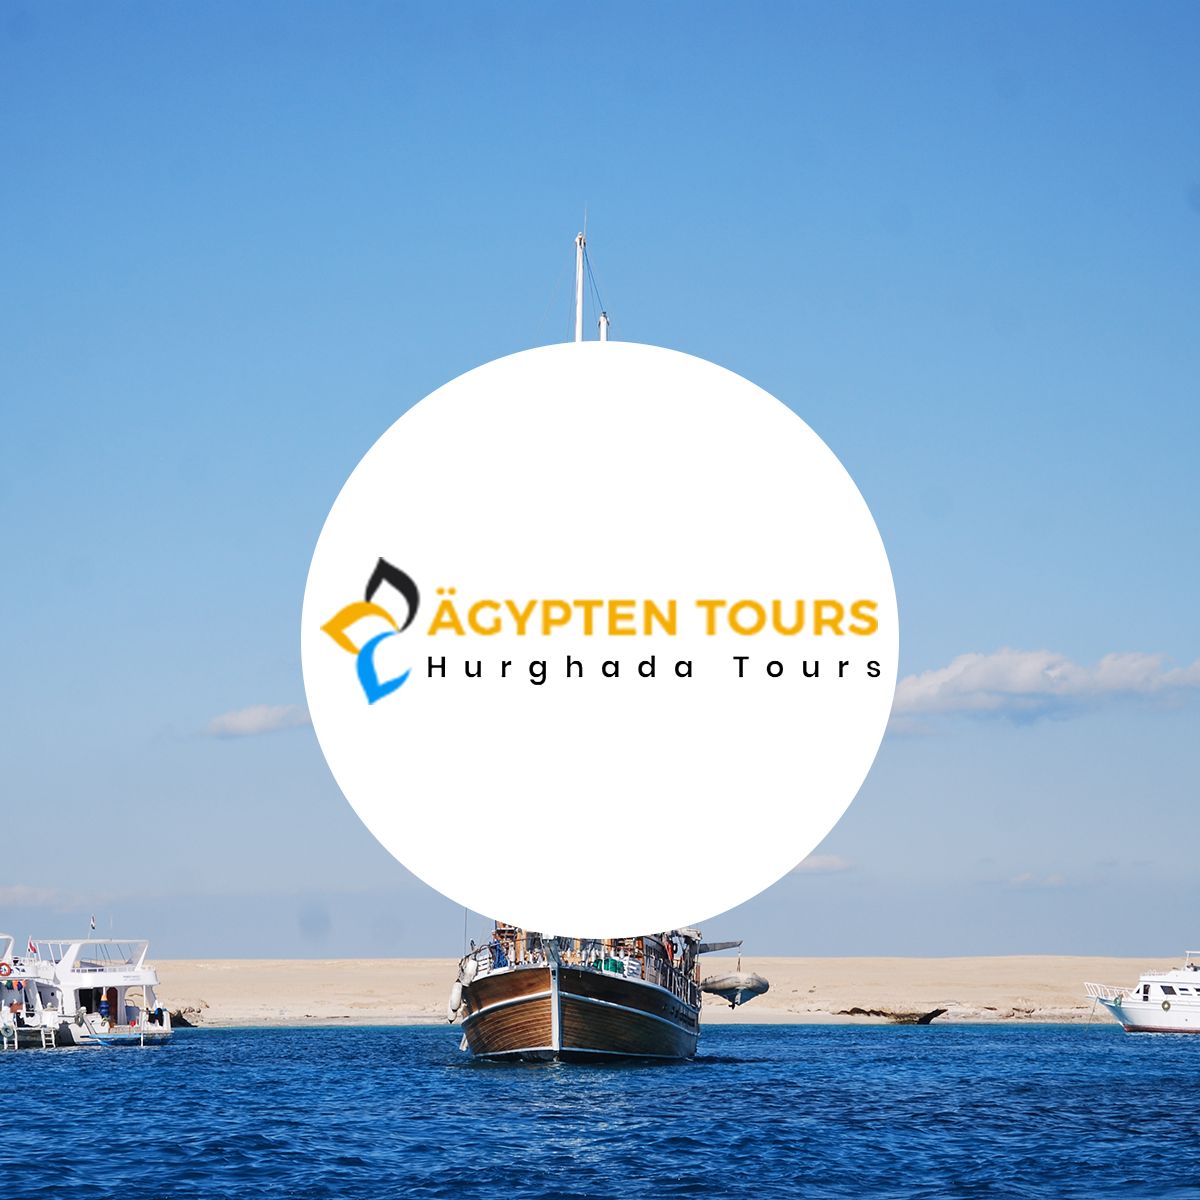 About Hurghada Tours